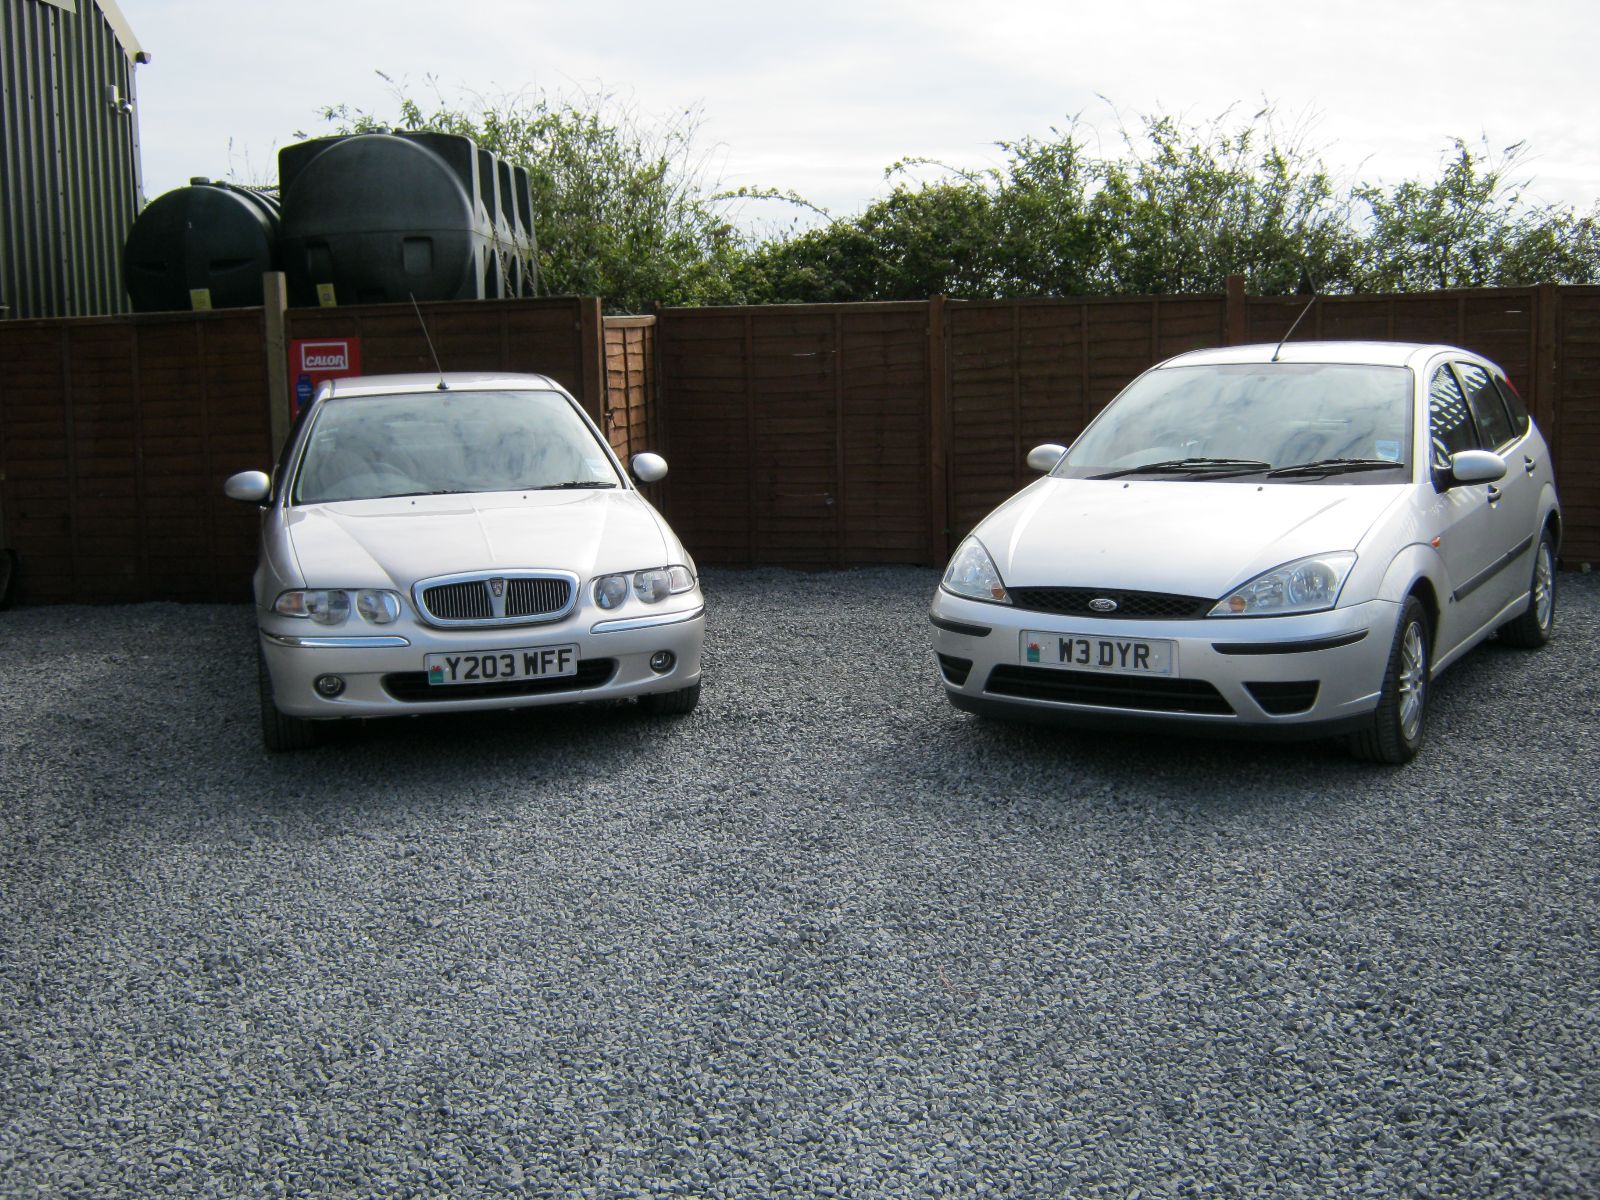 Cars can be collected and delivered and courtesy cars are available Dyfi Yard Repairs